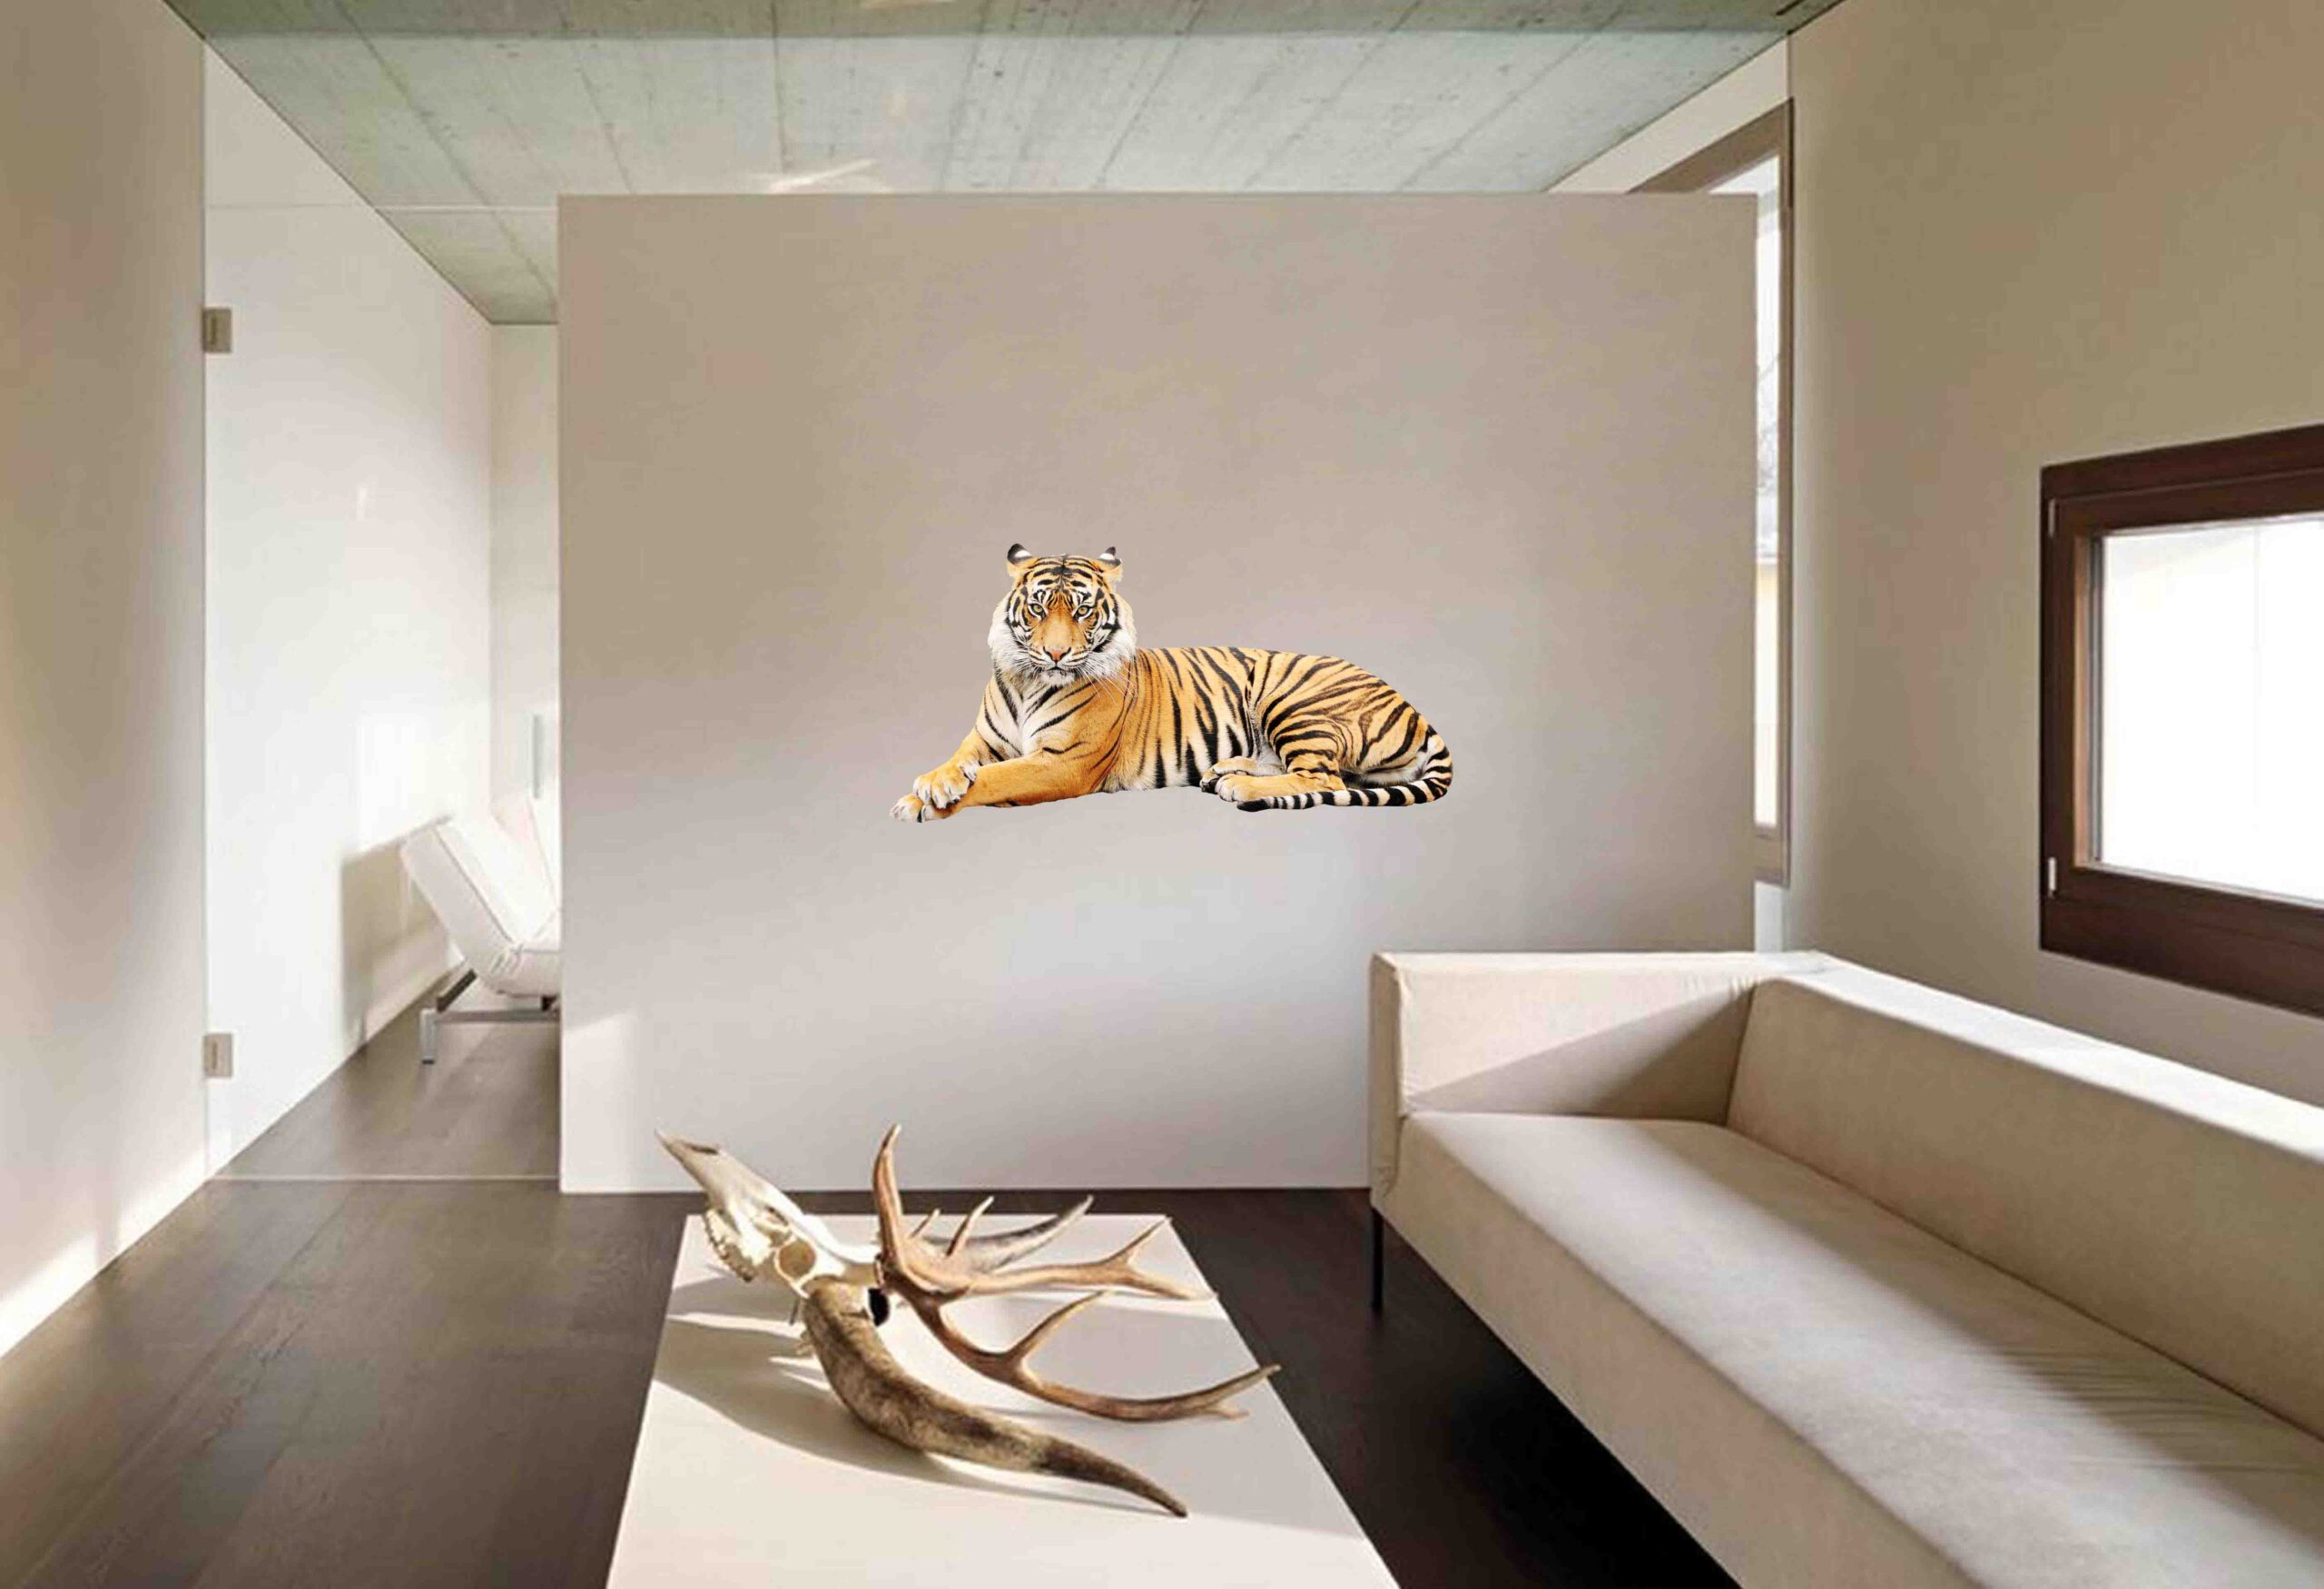 25 Modern Design Ideas To Bring A Feel Of Jungle Into Your Living Room – Using Wall Stickers